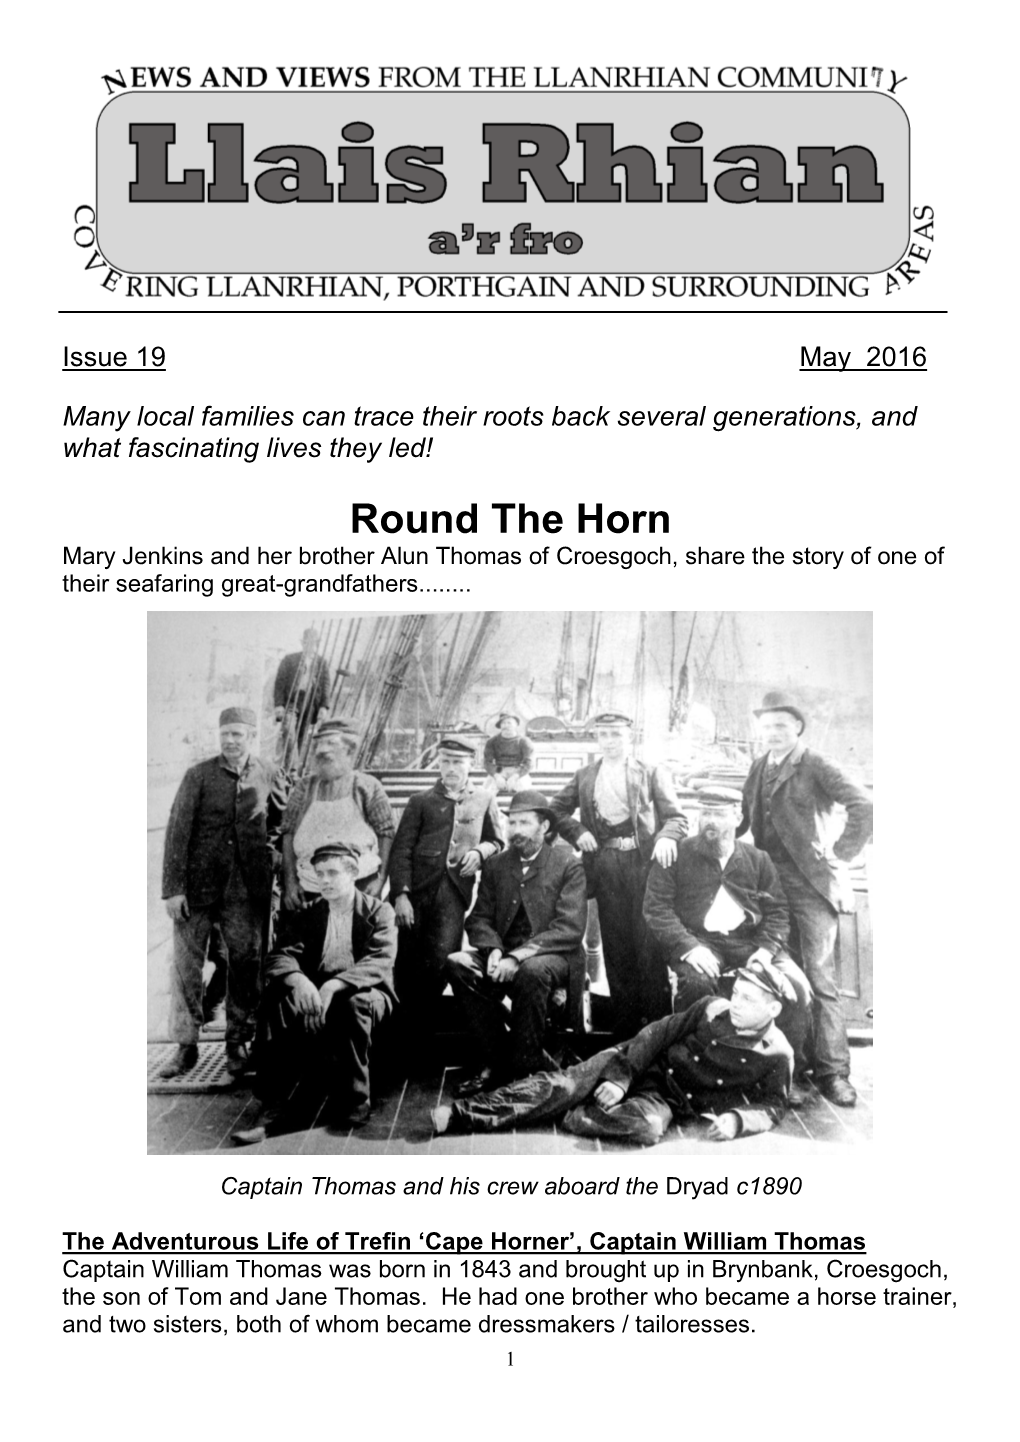 Round the Horn Mary Jenkins and Her Brother Alun Thomas of Croesgoch, Share the Story of One of Their Seafaring Great-Grandfathers